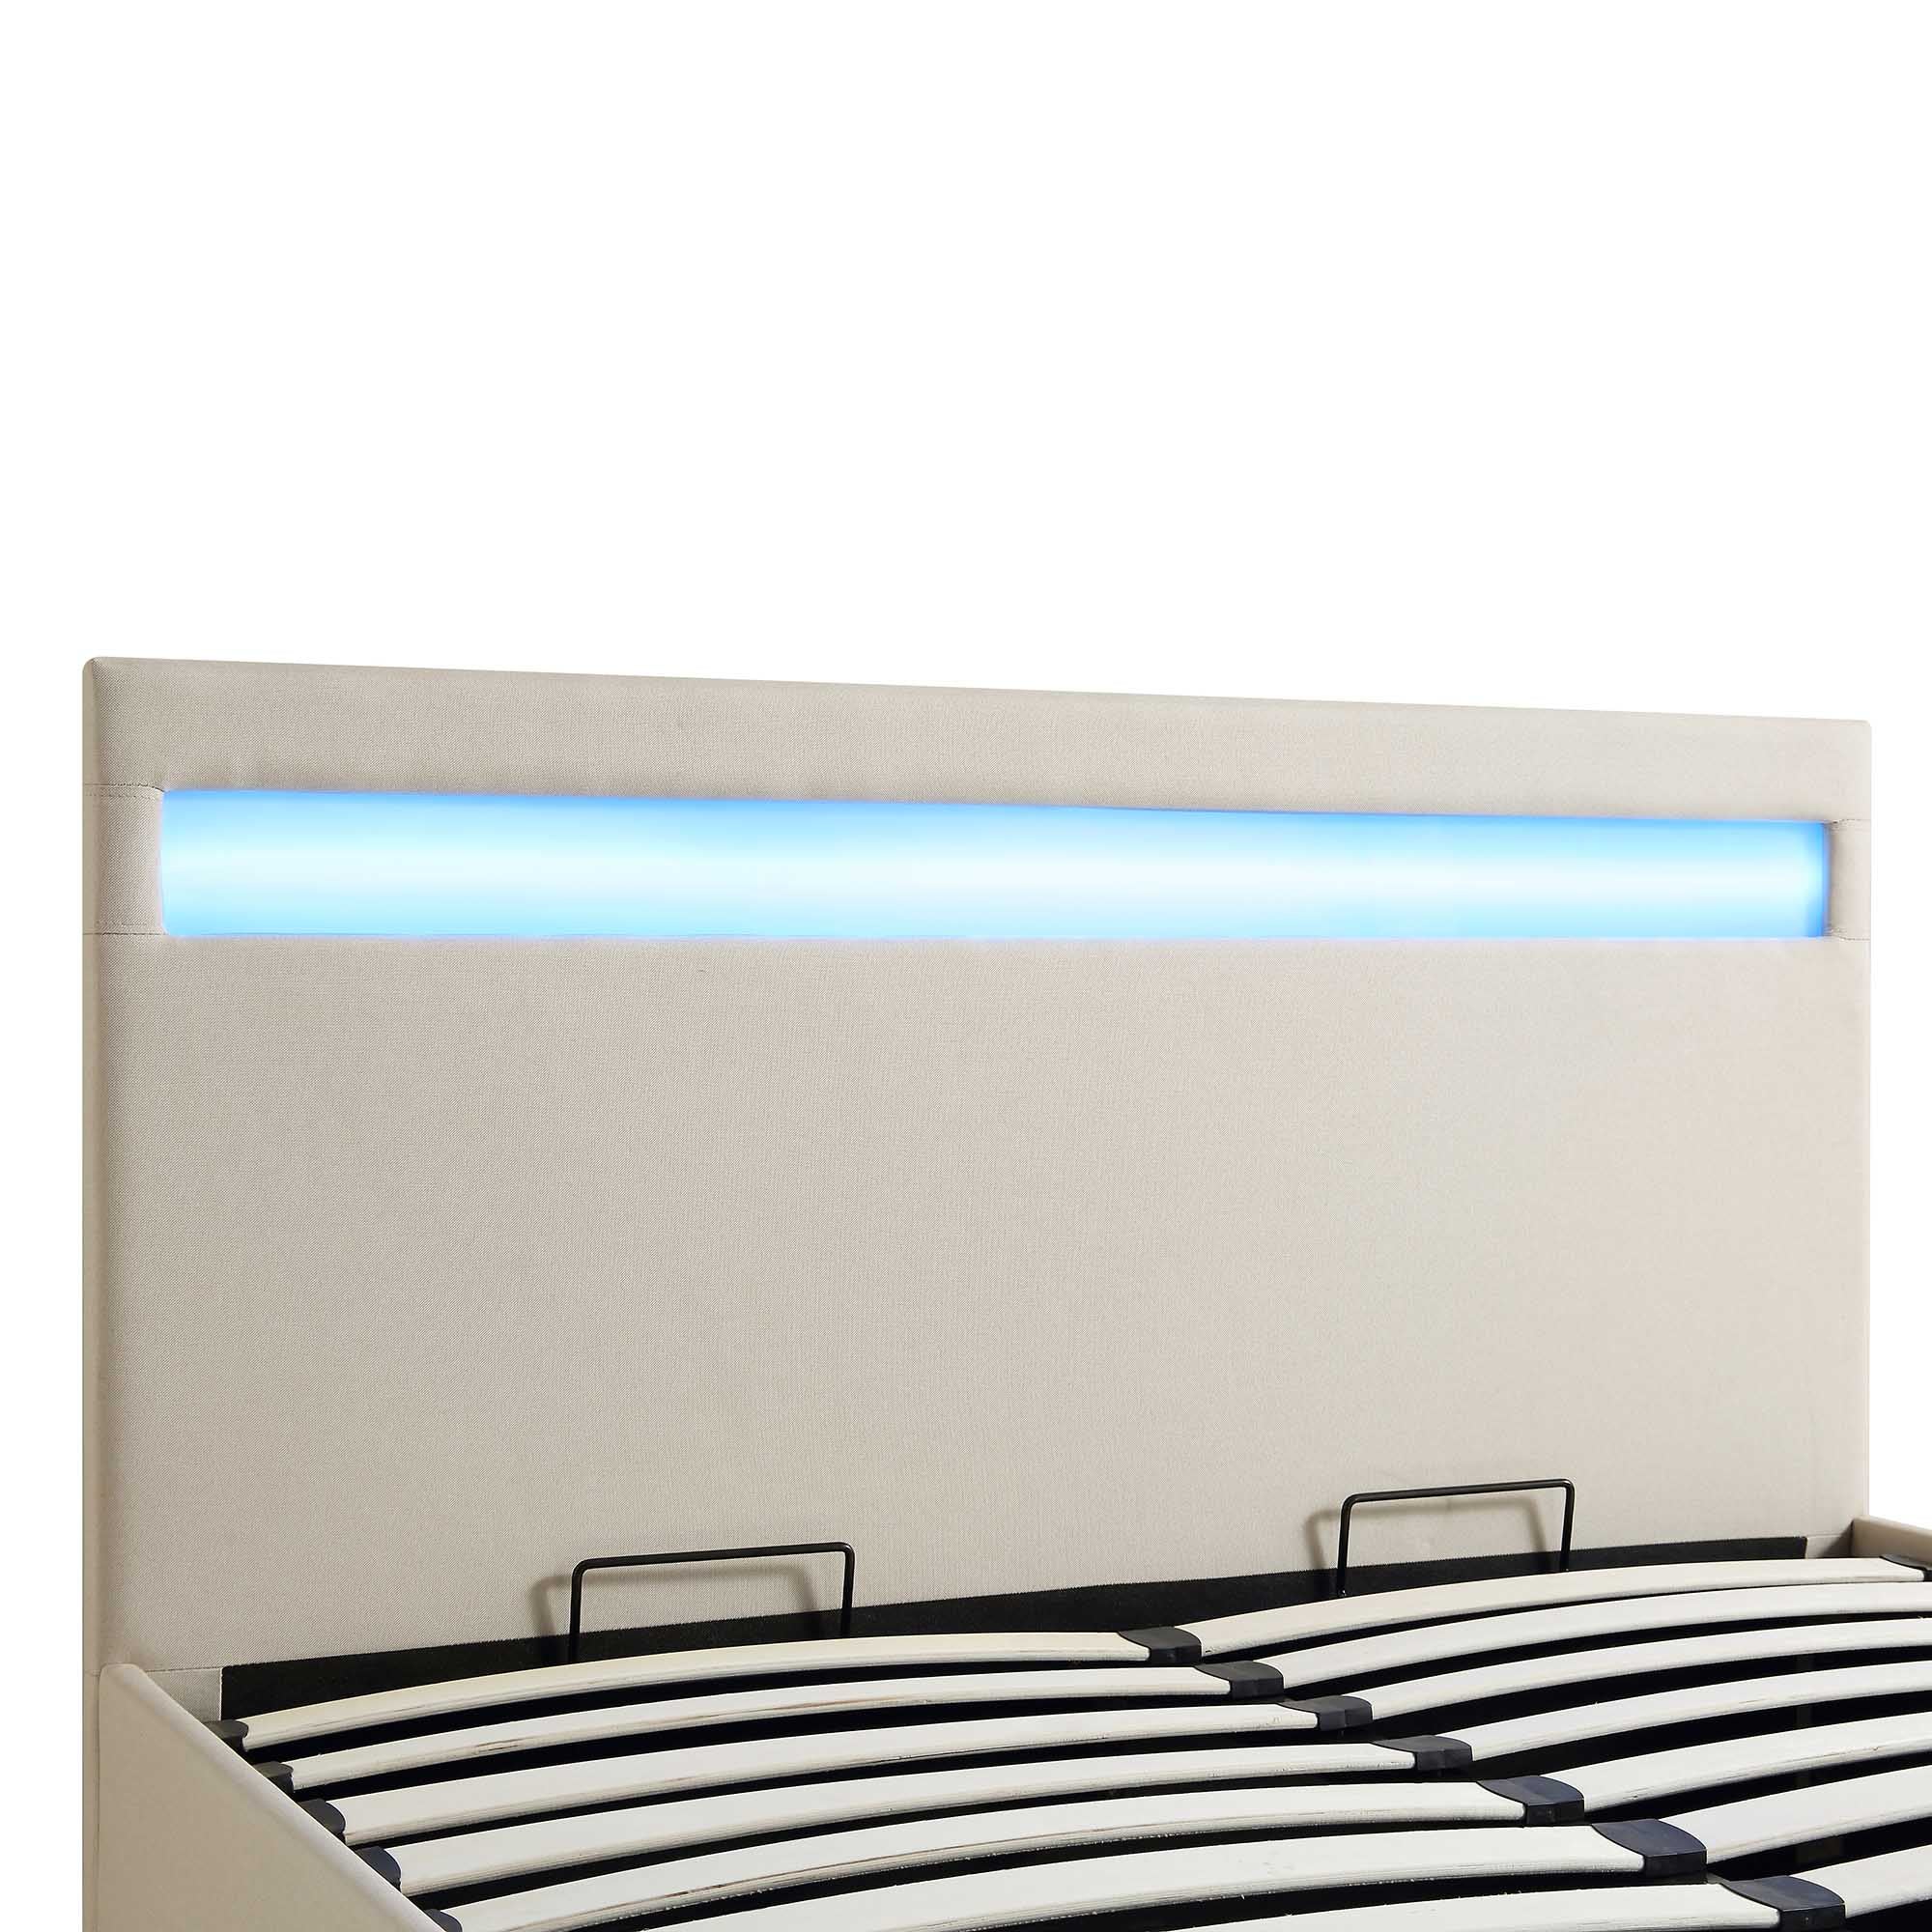 Pimlico End Opening Ottoman Storage Bed Frame with Muti-colour LED Headboard (Beige Fabric)